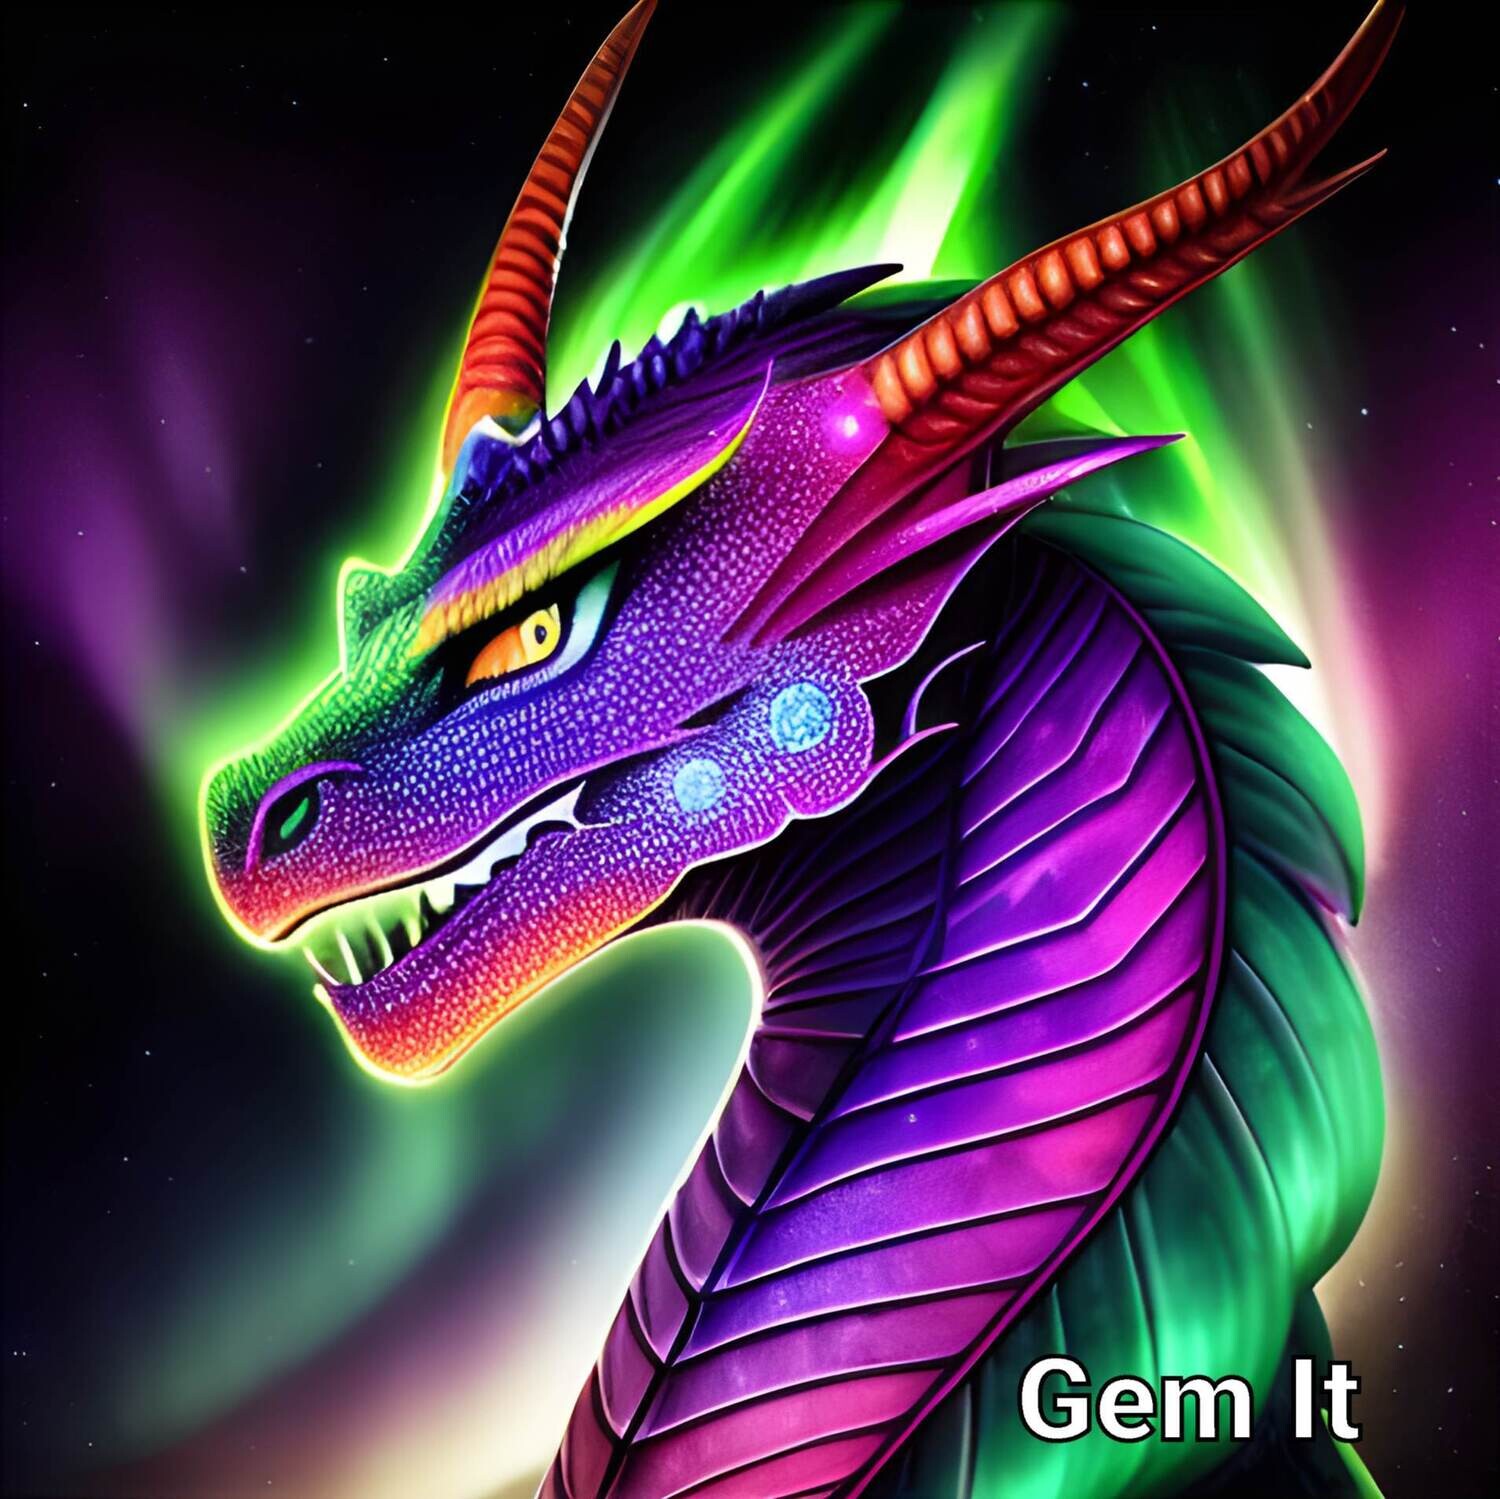 Comic Dragon 932 - Full Drill Diamond Painting - Specially ordered for you. Delivery is approximately 4 - 6 weeks.